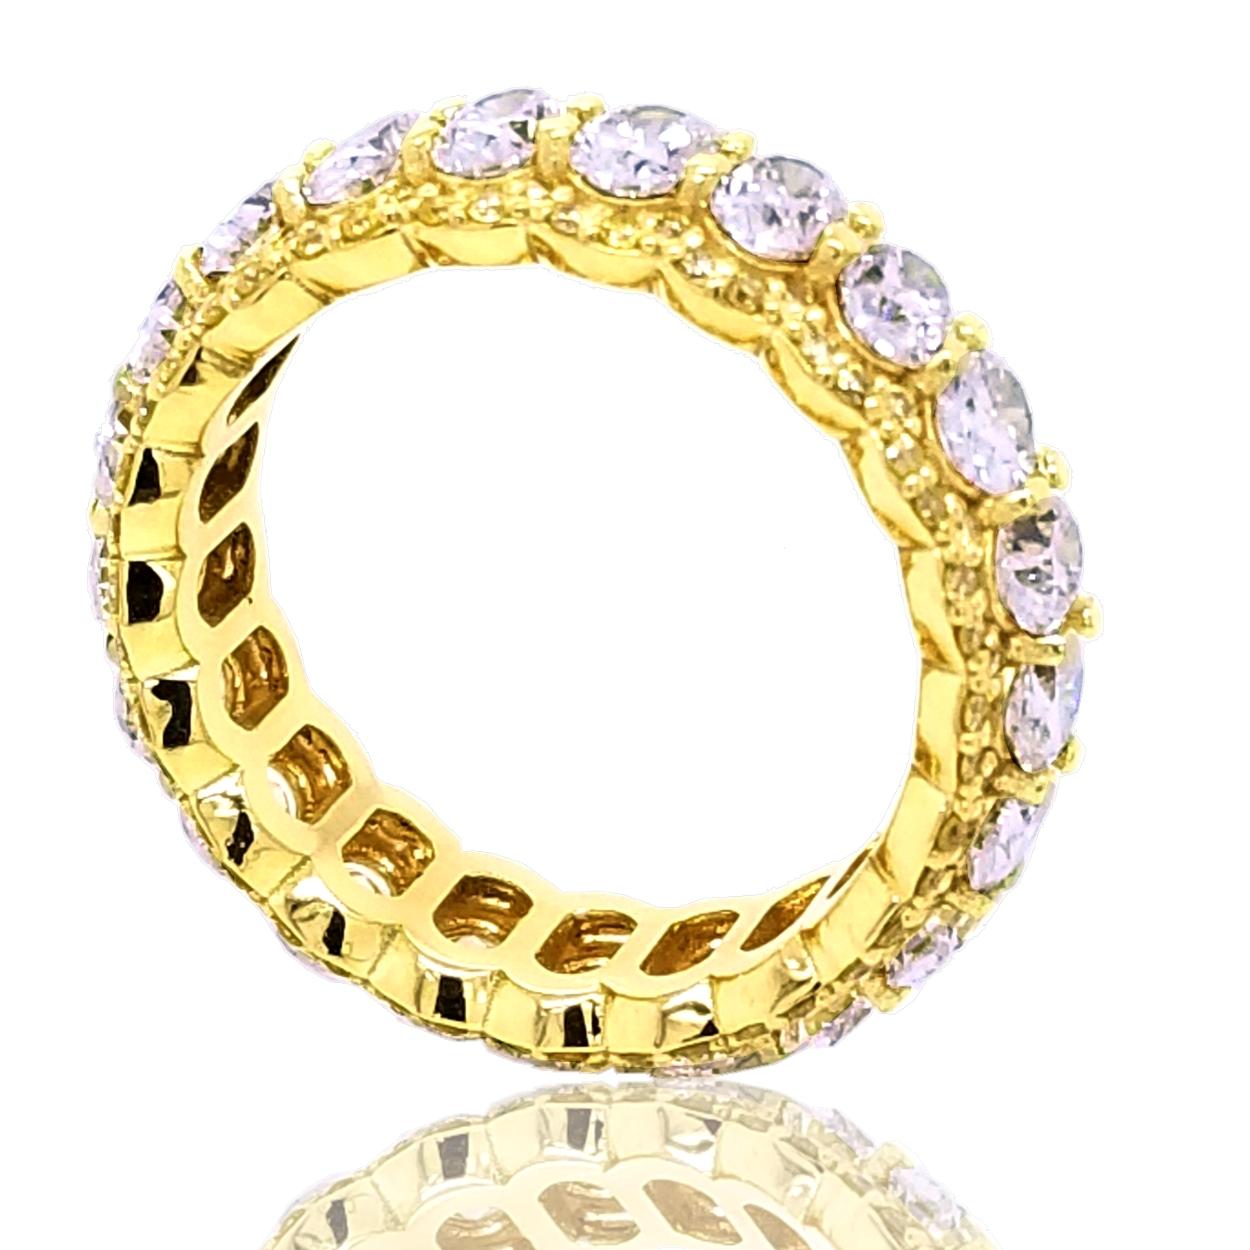 This beautiful Eternity Ring is made of 18K Yellow Gold with 21 perfectly matched (VS/E-F) 0.15 Ct each Oval Brilliant Diamonds Set in Shared Prong Mode with Pave Set Fancy Yellow Round Brilliant diamonds on the edge..
Total Weight of Oval diamonds: